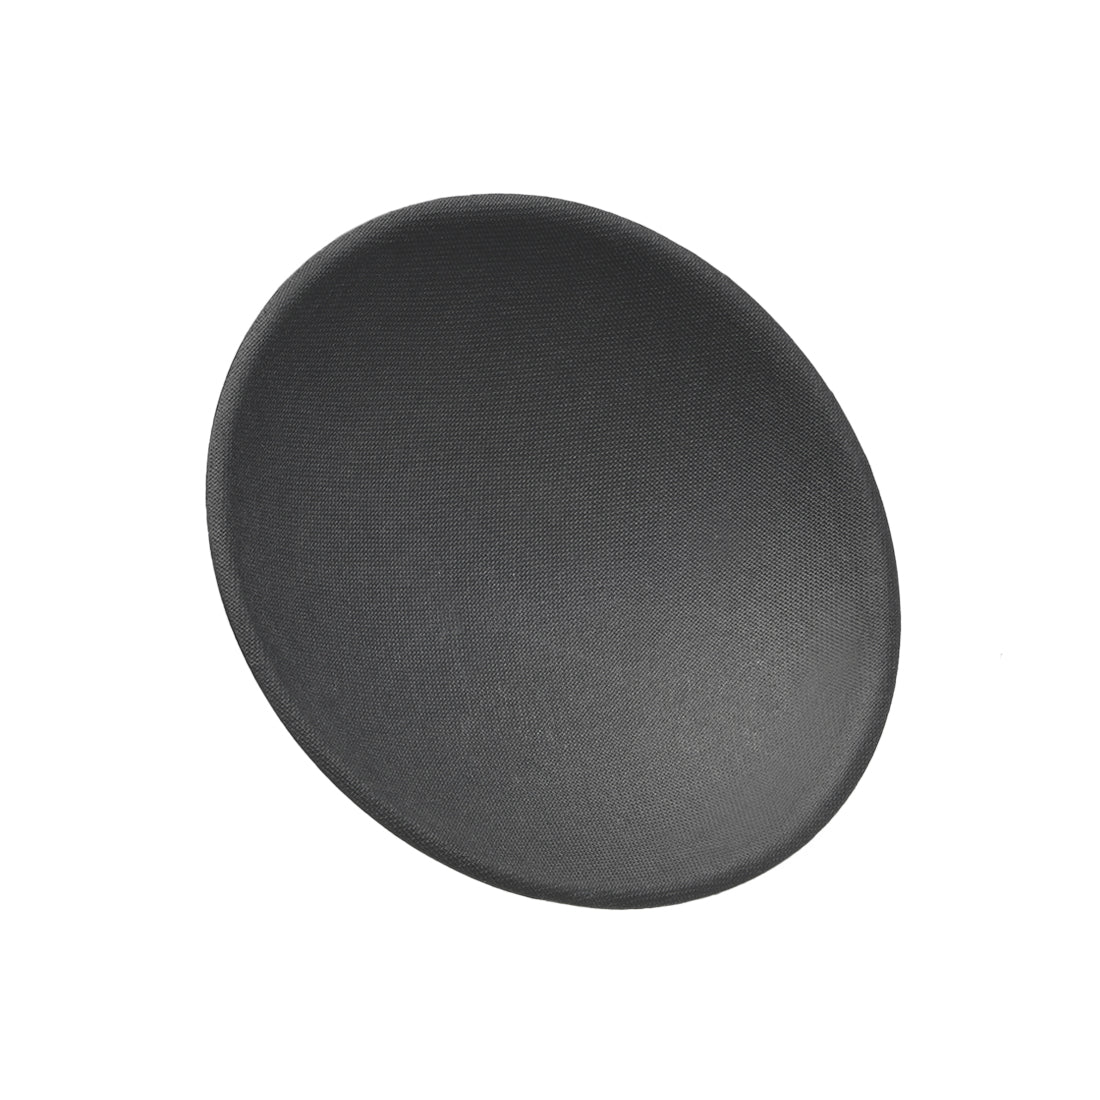 uxcell Uxcell Speaker Dust Cap 115mm/4.5" Diameter Subwoofer Paper Dome Coil Cover Caps